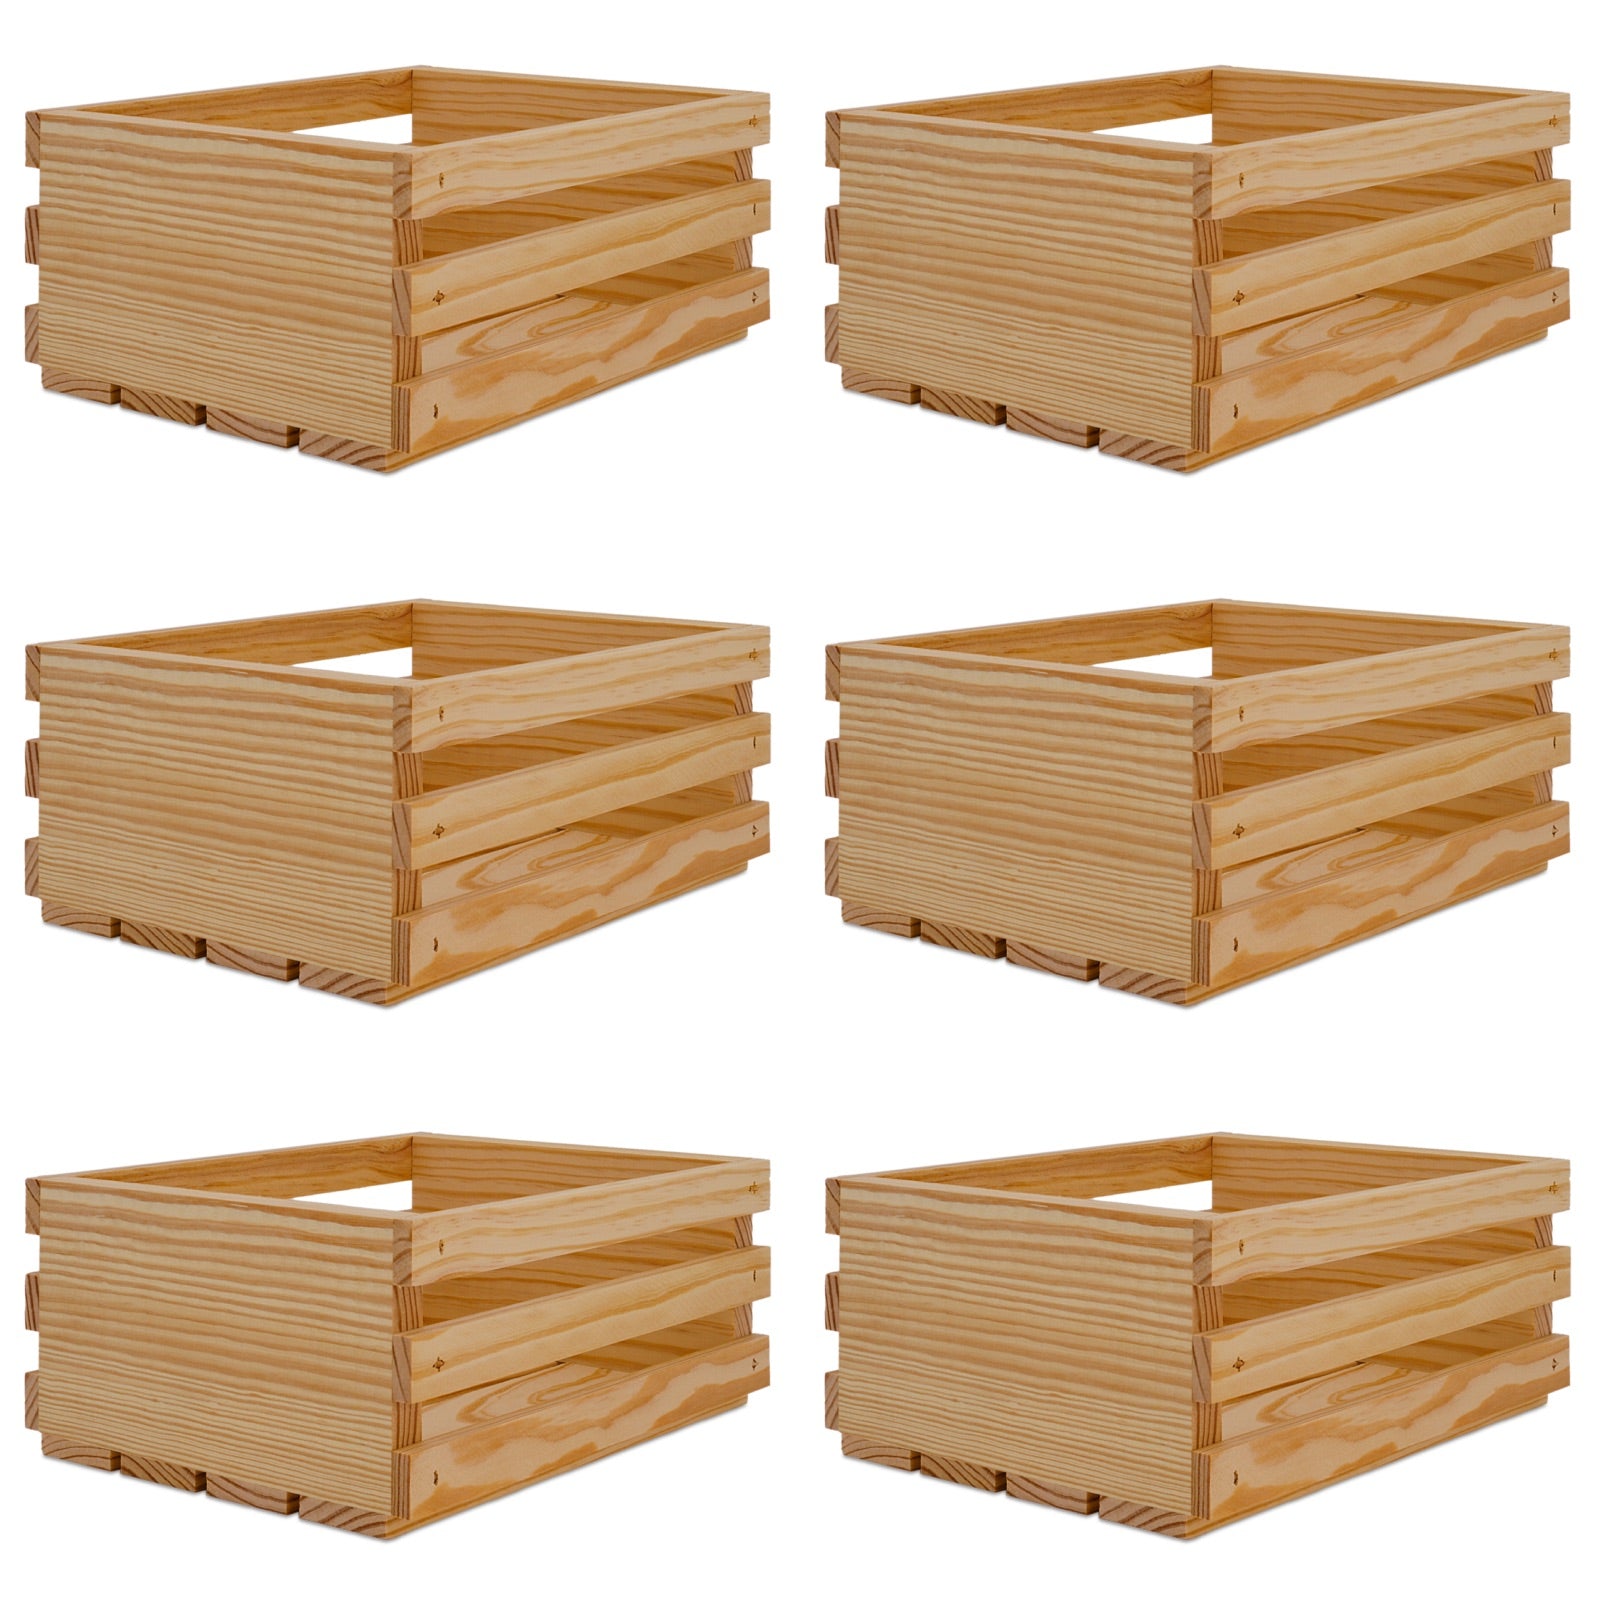 6 Small wooden crates 10x8x4.5, 6-SS-10-8-4.5-NX-NW-NL, 12-SS-10-8-4.5-NX-NW-NL, 24-SS-10-8-4.5-NX-NW-NL, 48-SS-10-8-4.5-NX-NW-NL, 96-SS-10-8-4.5-NX-NW-NL